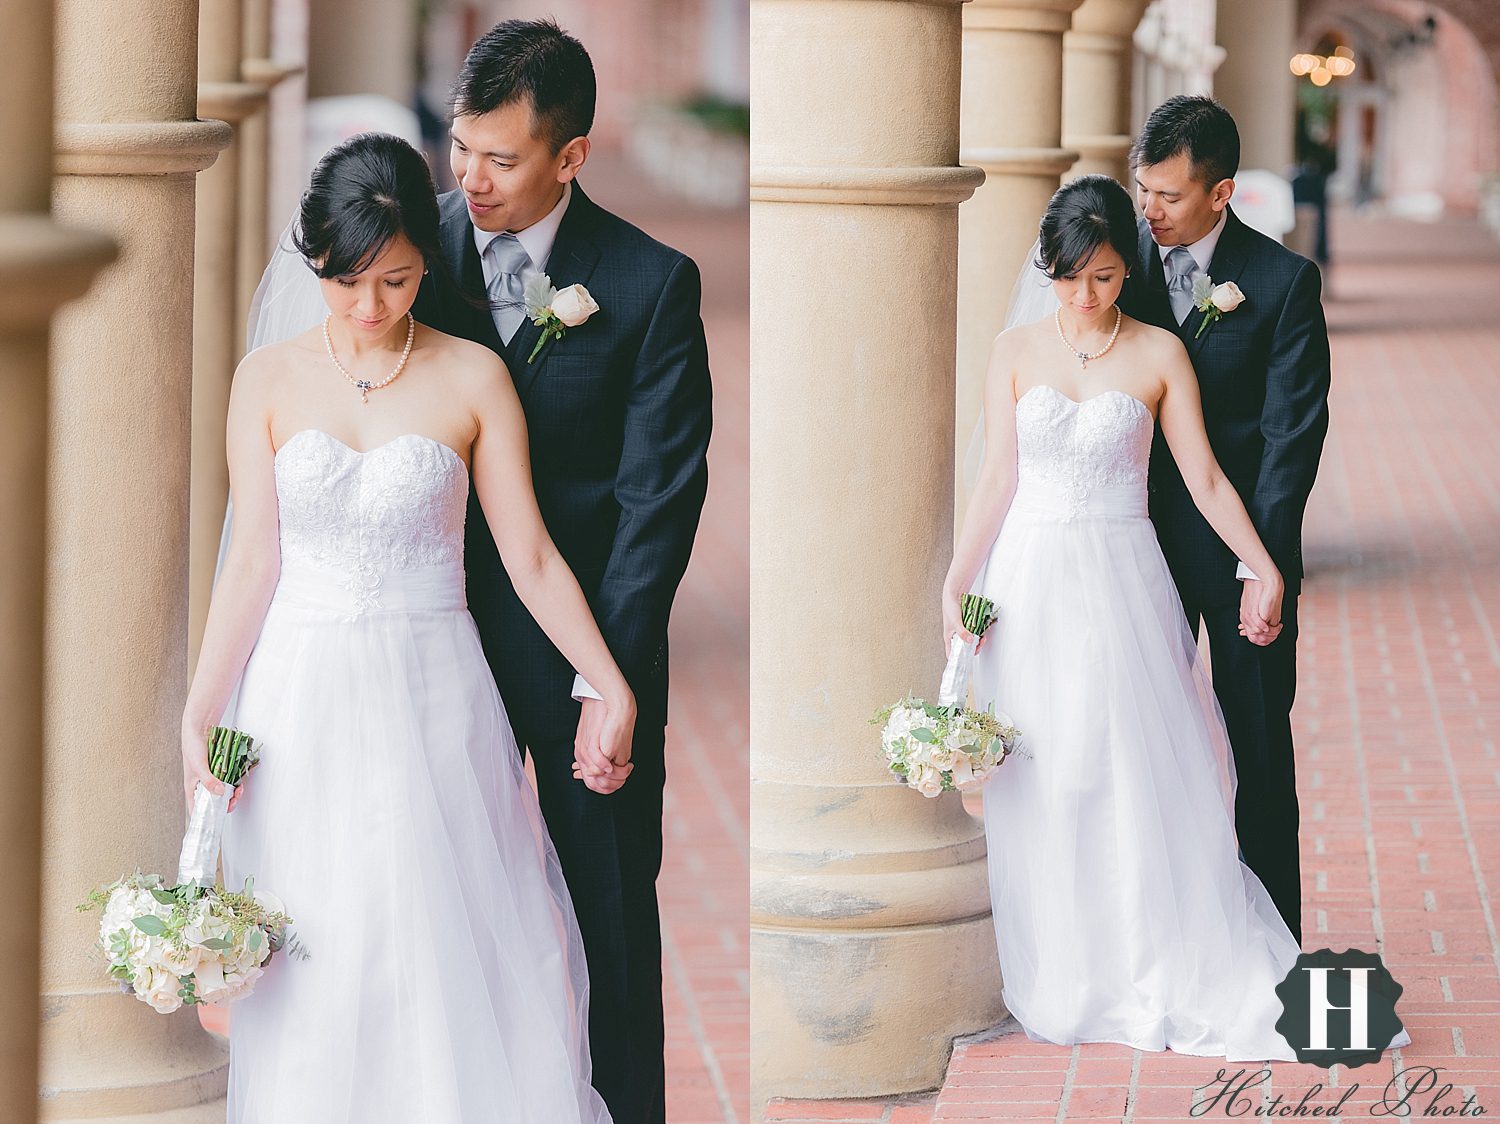 Airy,Bridal,Bright,Engagement,Light,Los Angeles Wedding Photographer,Malaga Cove Library Wedding,Malaga Cove Plaza Wedding Photos,Palos Verdes Wedding,Photography,Portraits,Romantic,Timeless,Vintage,Wedding,